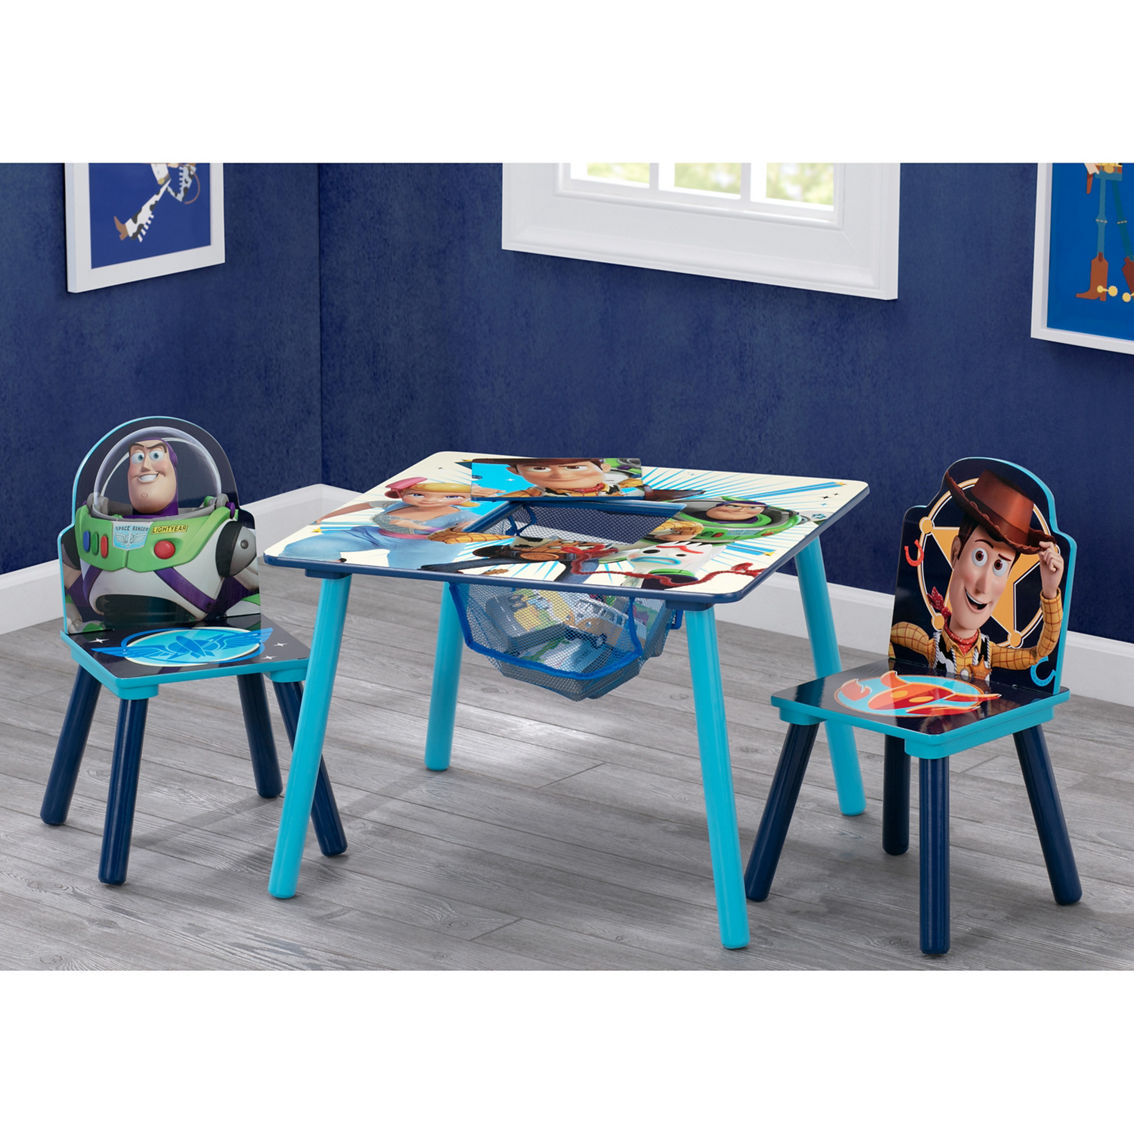 Delta Children Toy Story 4 Table and Chair Set with Storage - Image 4 of 5